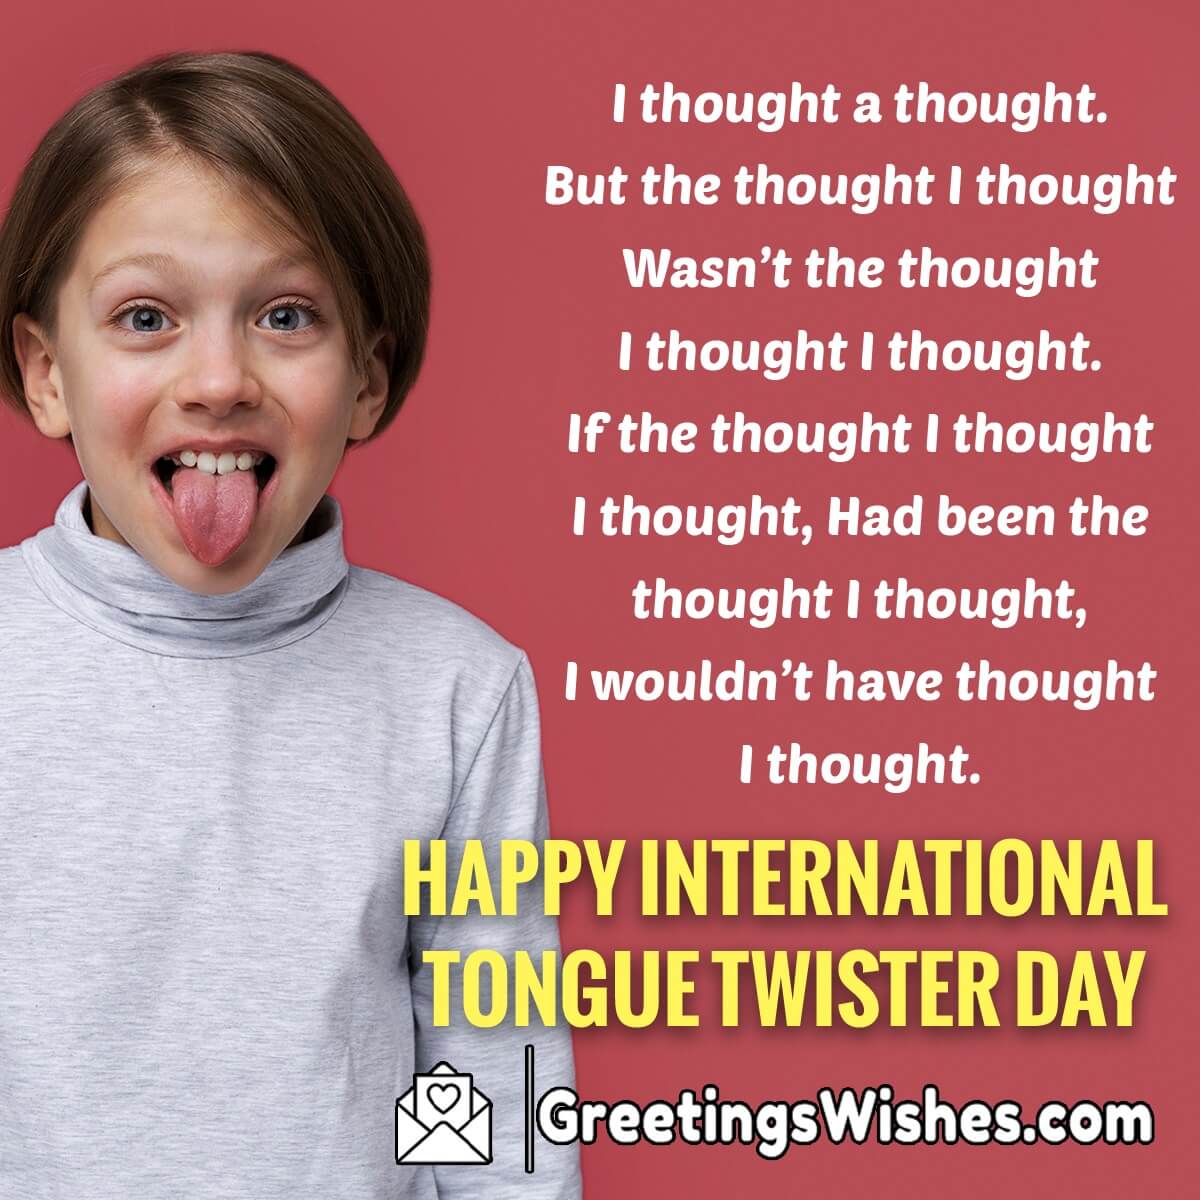 Funny International Tongue Twister Day Quote